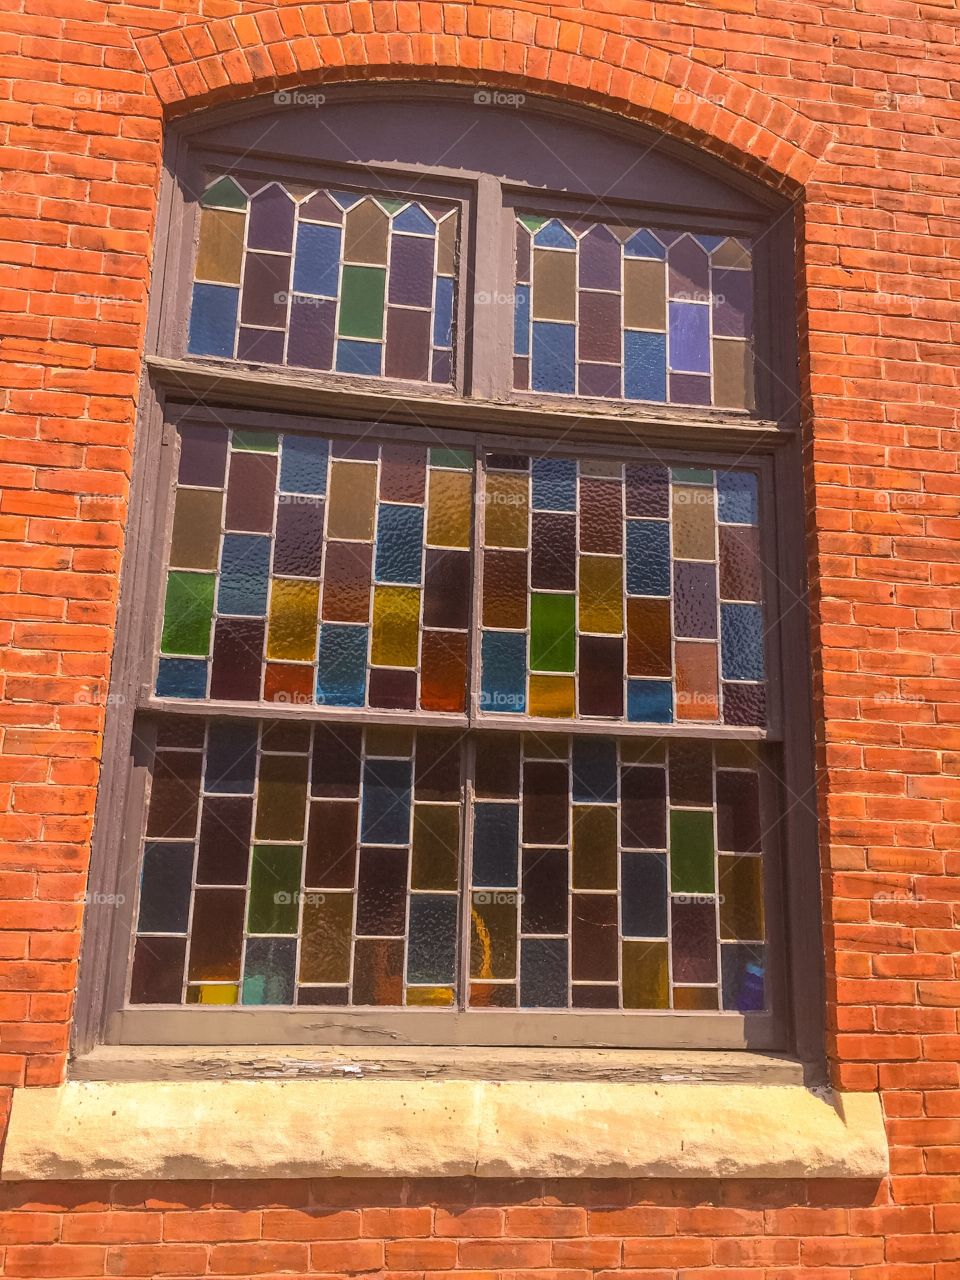 Windows of stained glass